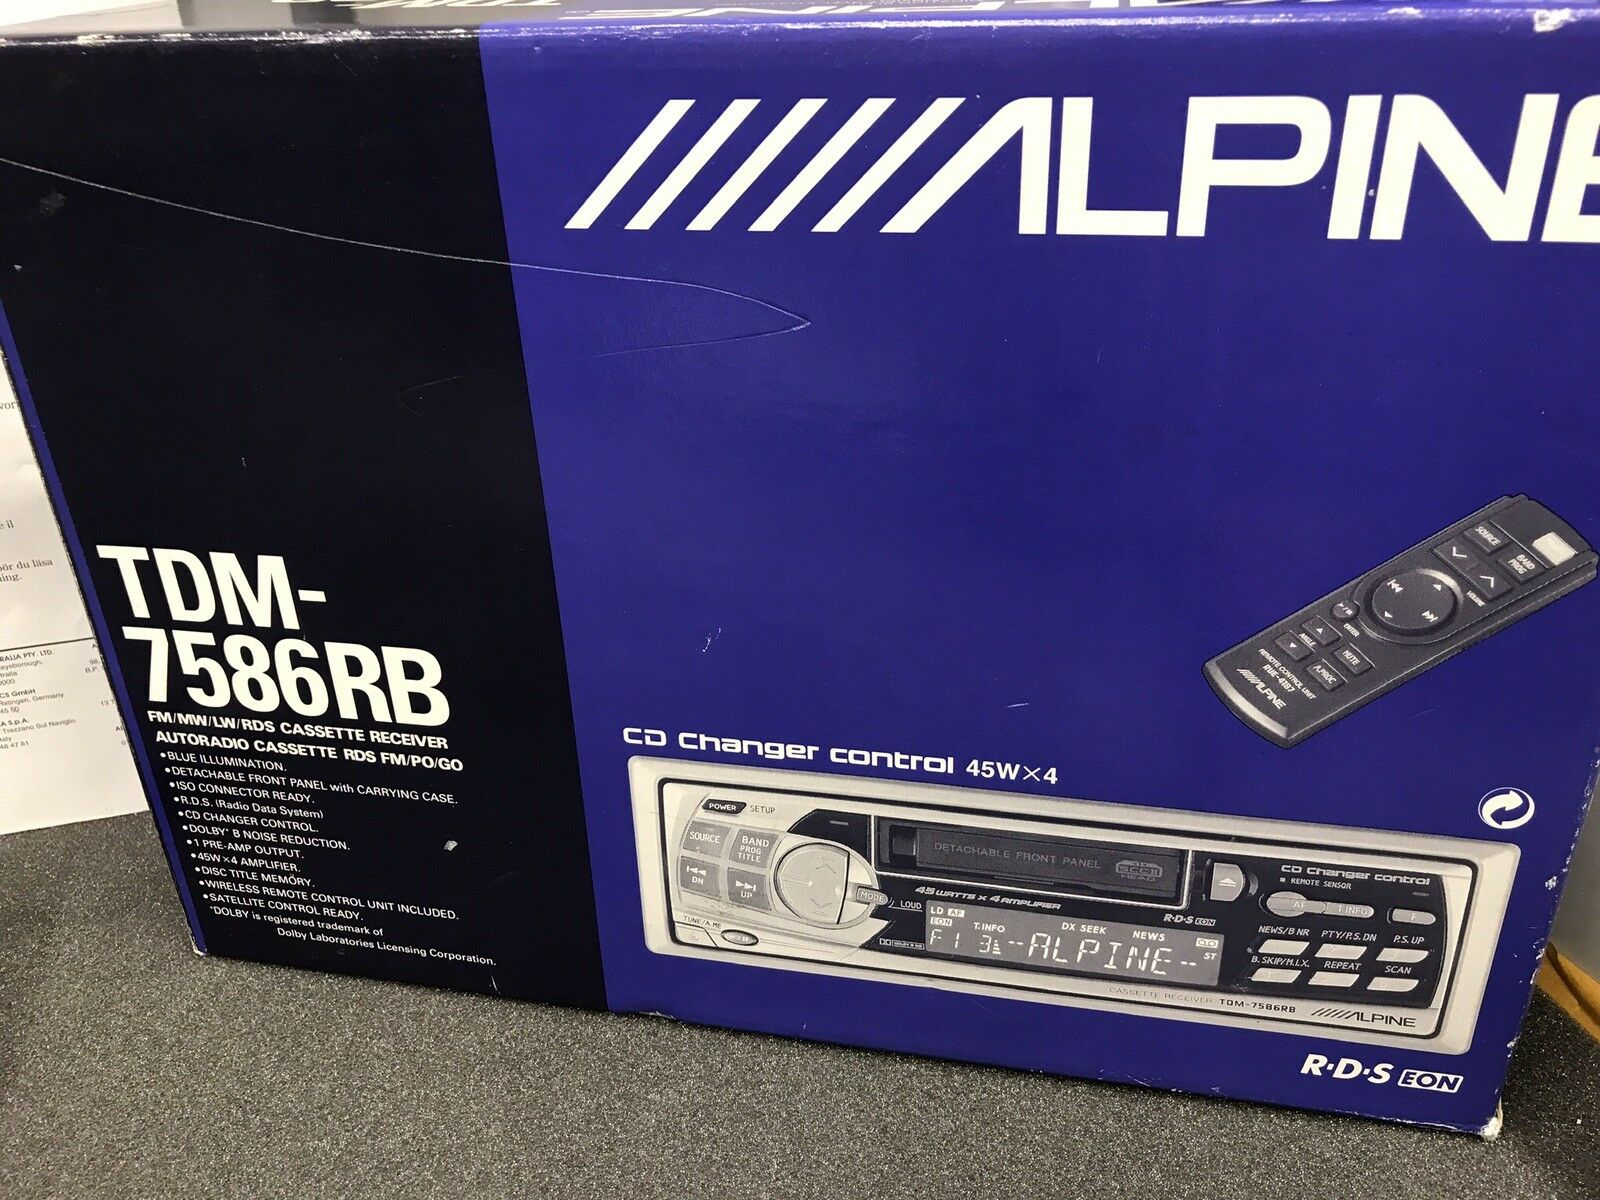 Old Classic Alpine Car Radio Cassette Player Model Tdm-7586rb With M-Bus Control